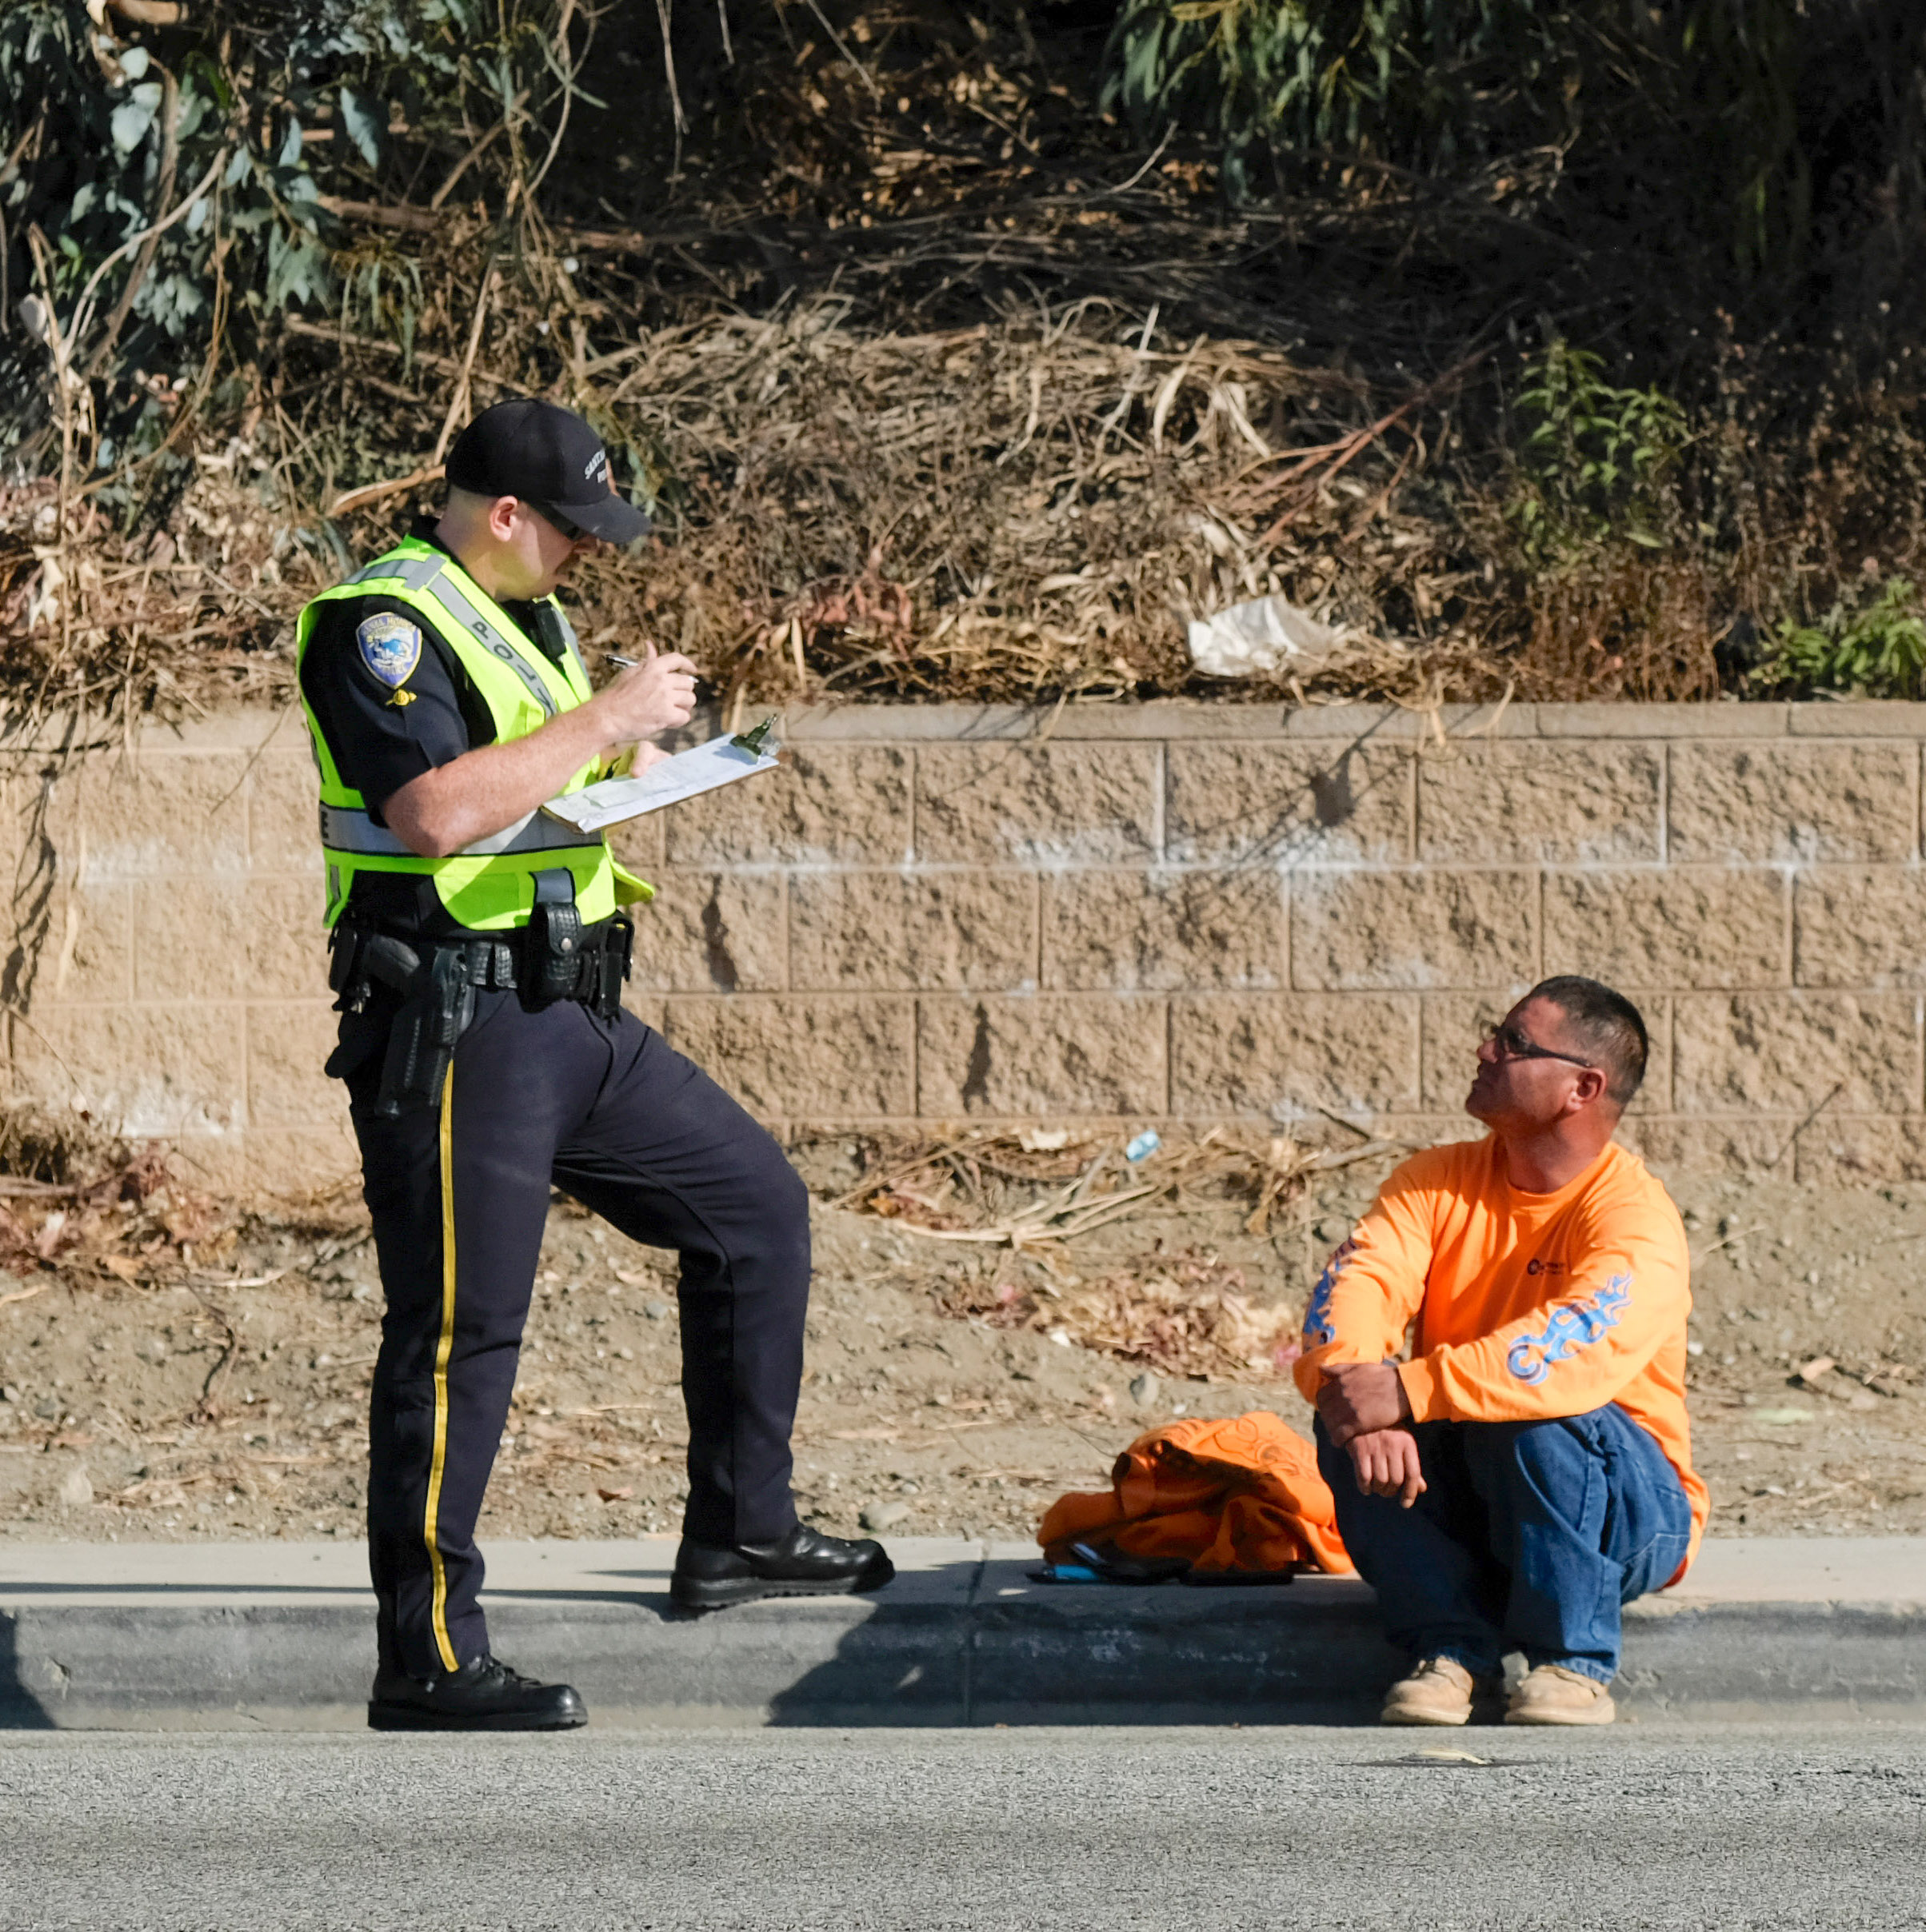  Santa Monica Police Officer conducting an investiagation with person who was involved in the accidenton November 21, 2017 in Santa Monica, CALIF. (Photo by Jayrol San Jose) 